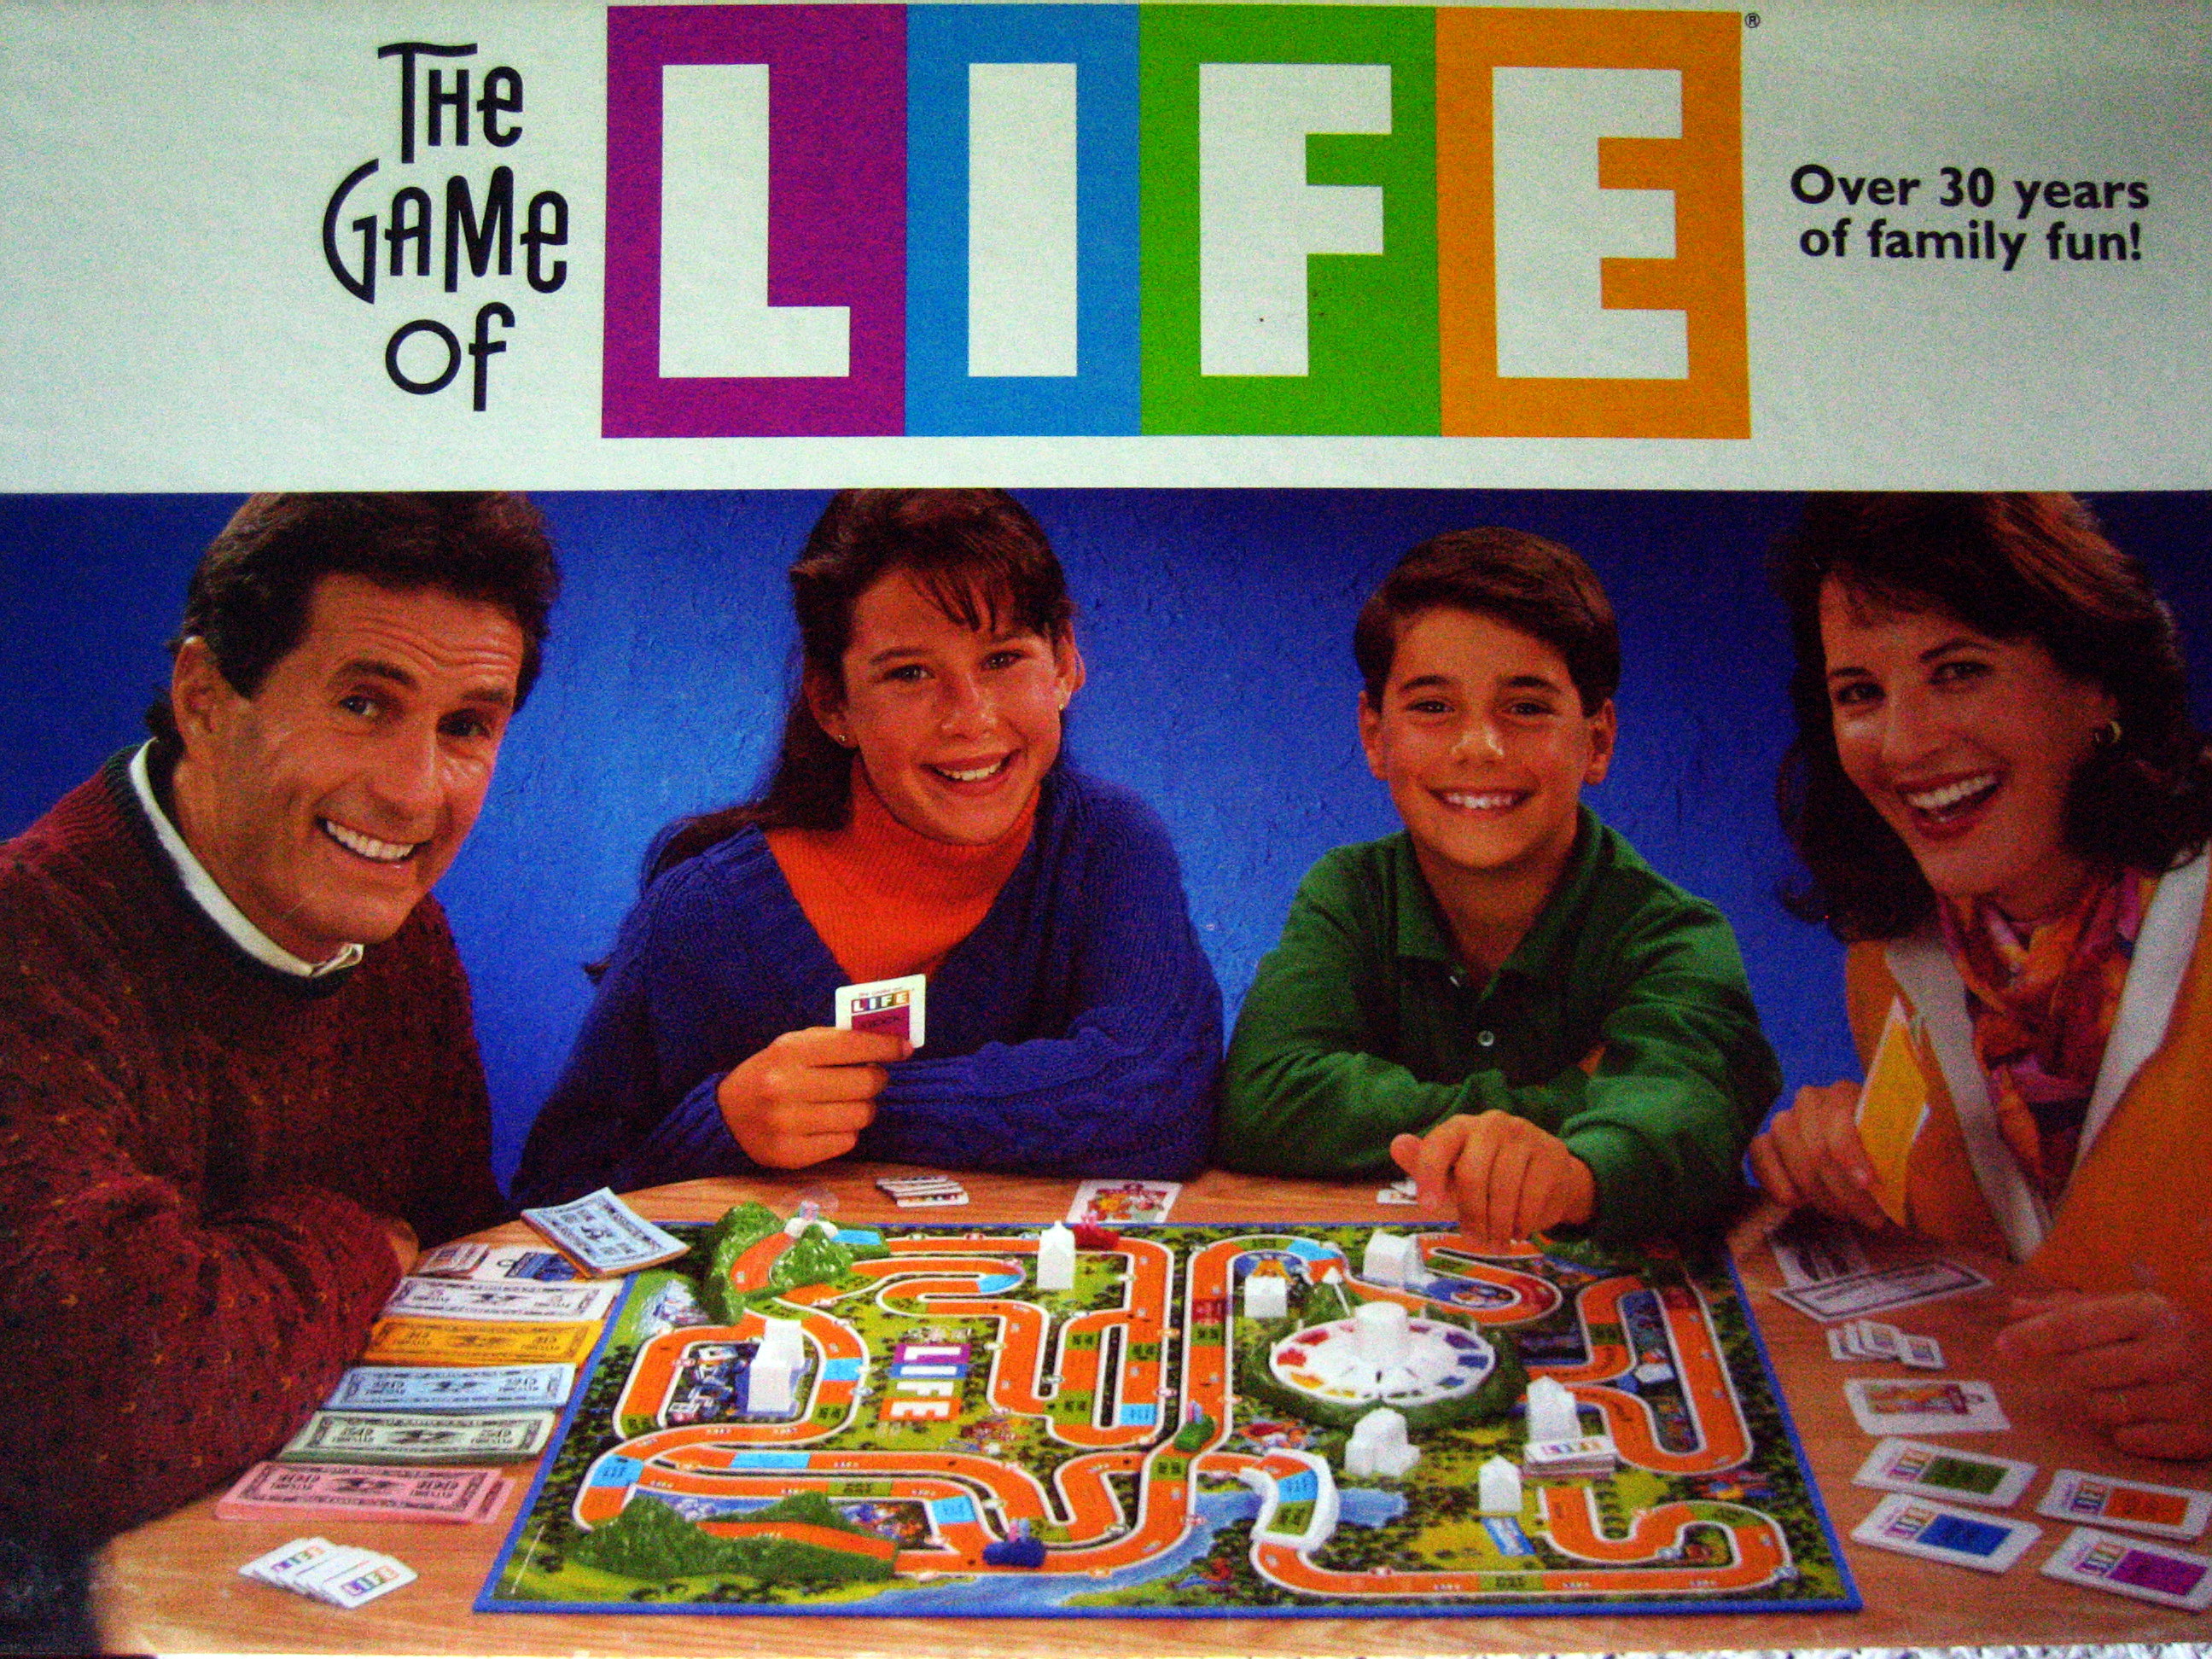 The Game of Life 2 revamps a childhood classic